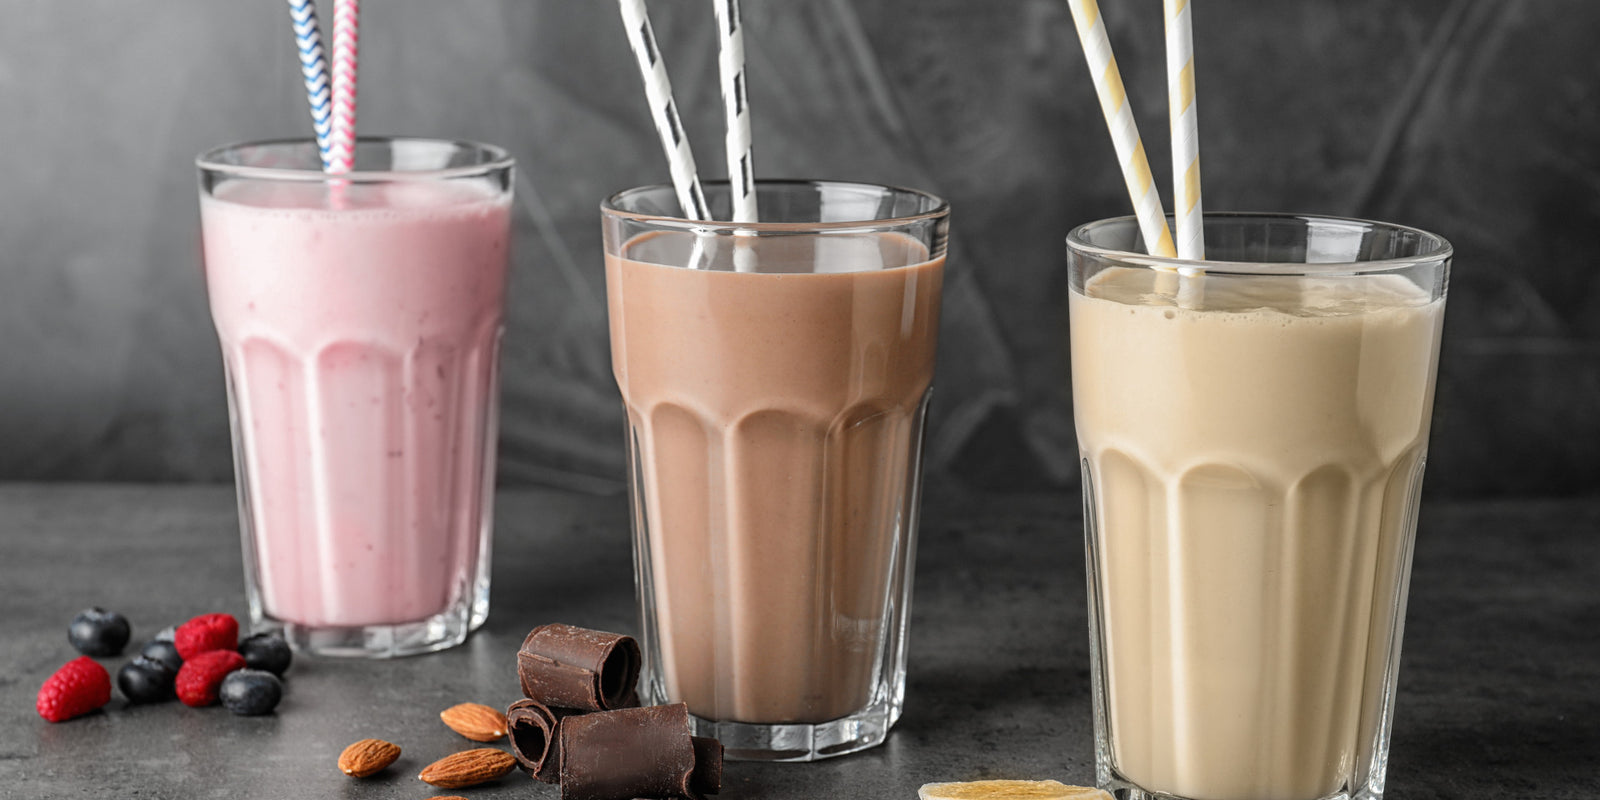 Best meal replacement shakes